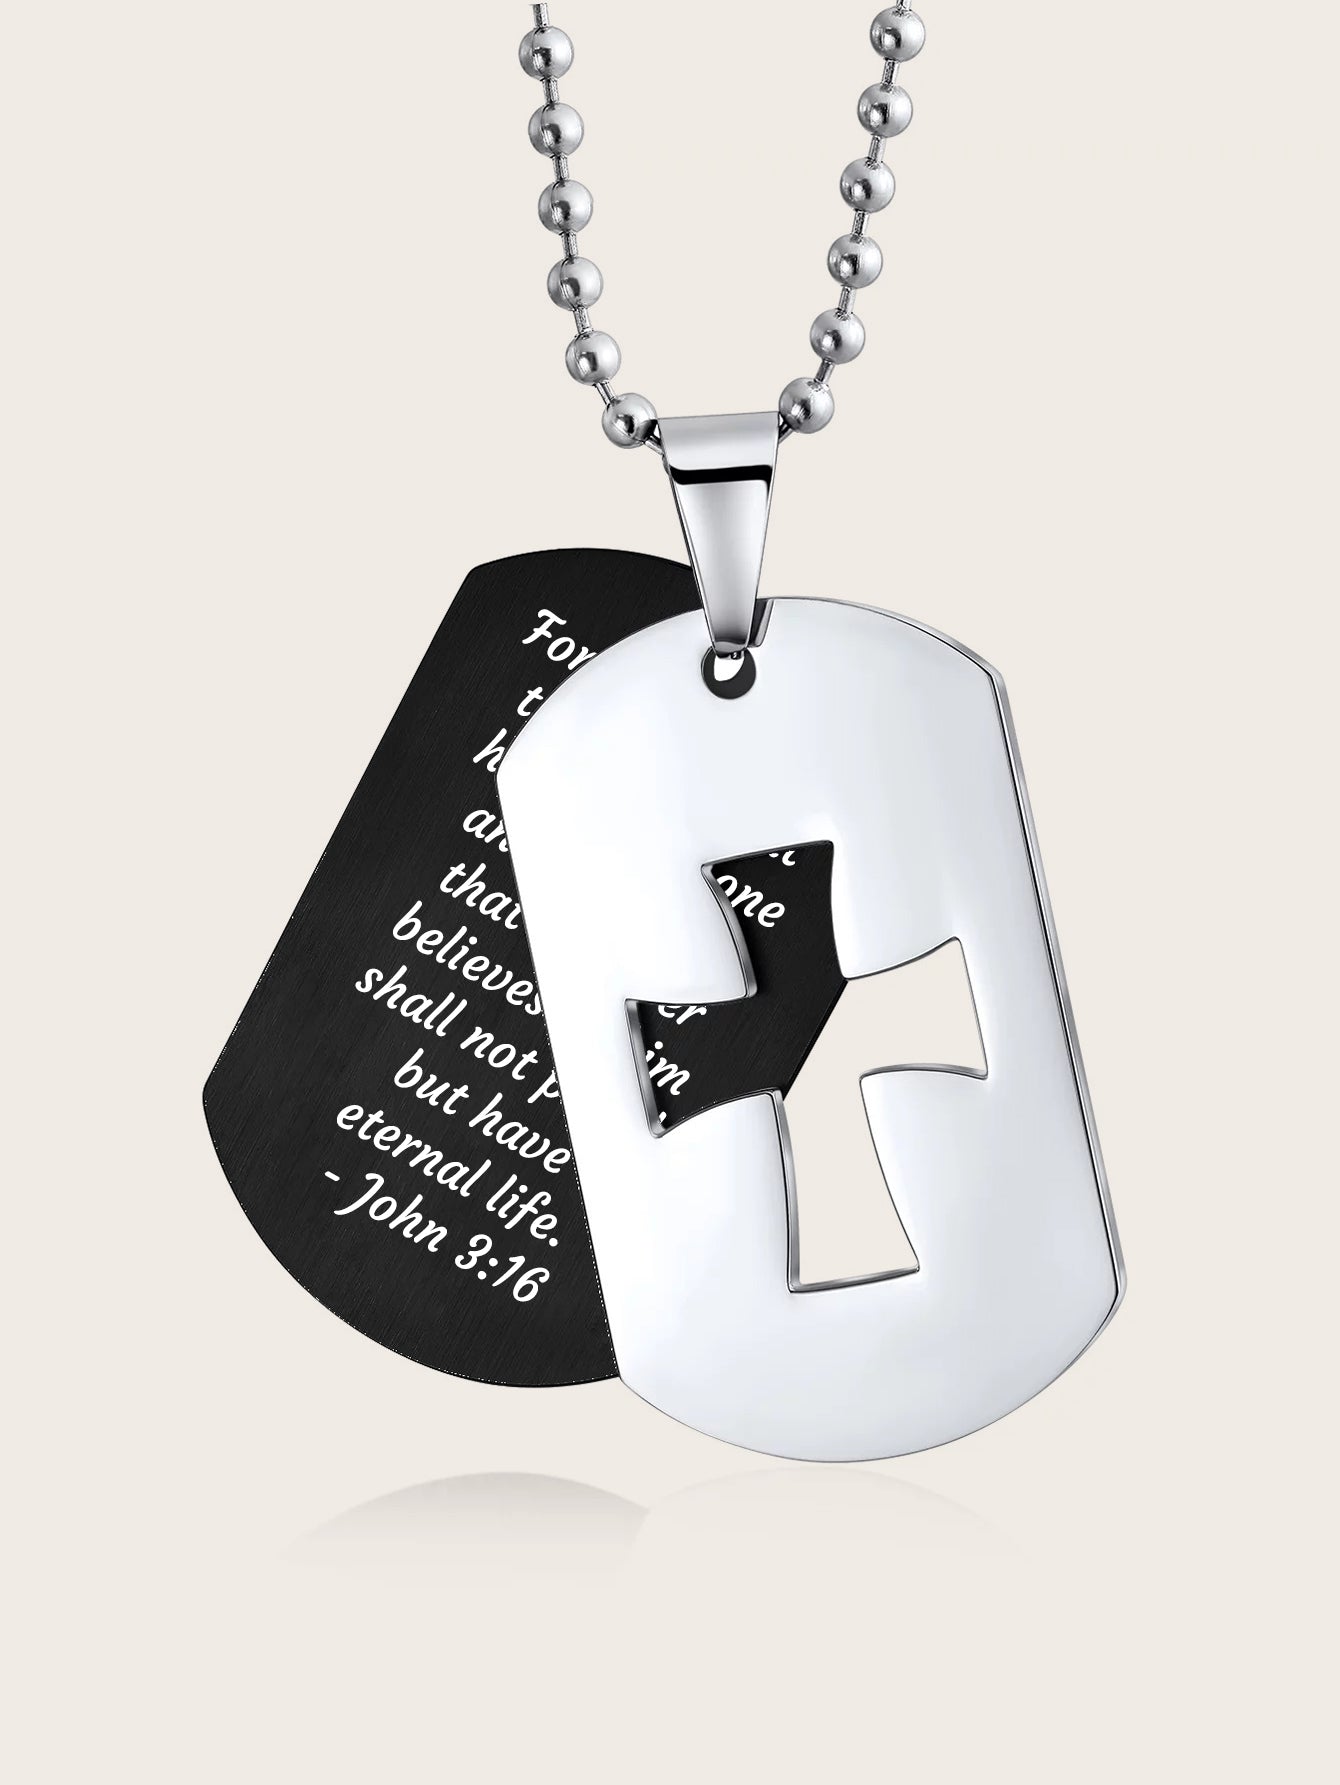 Bible Verse Cross Dog Tag Necklace for Men Stainless Steel Chain 24inch Inspirational Christian Jewelry Meaningful Religious Gift for Boys